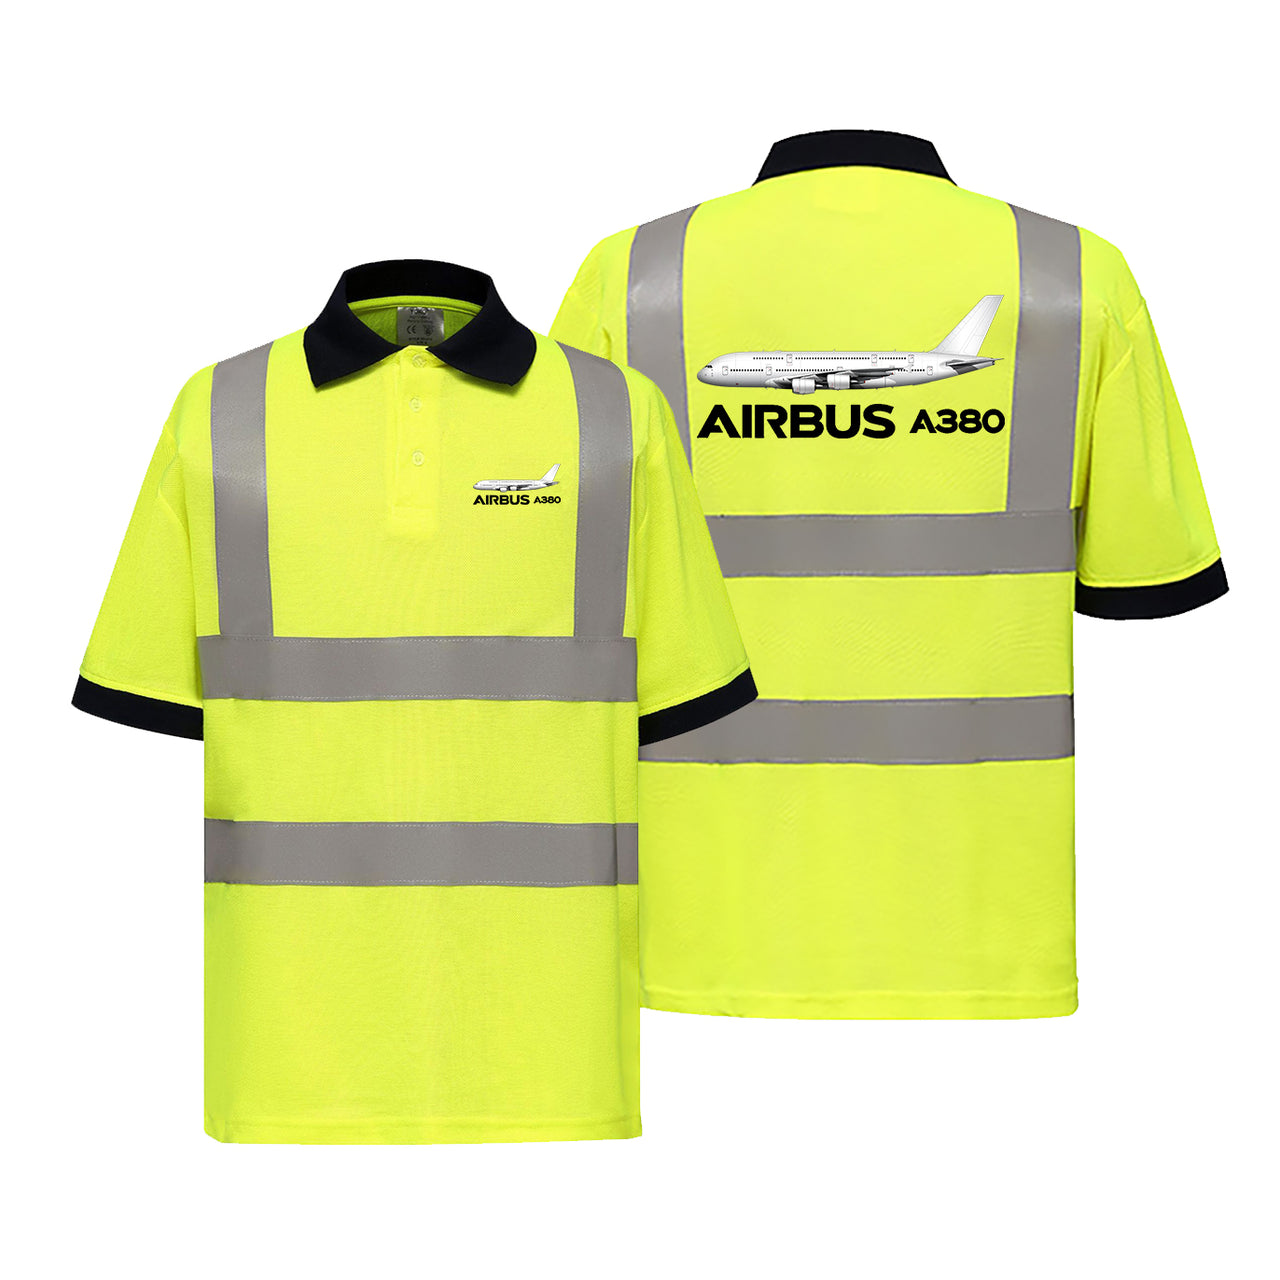 The Airbus A380 Designed Reflective Polo T-Shirts